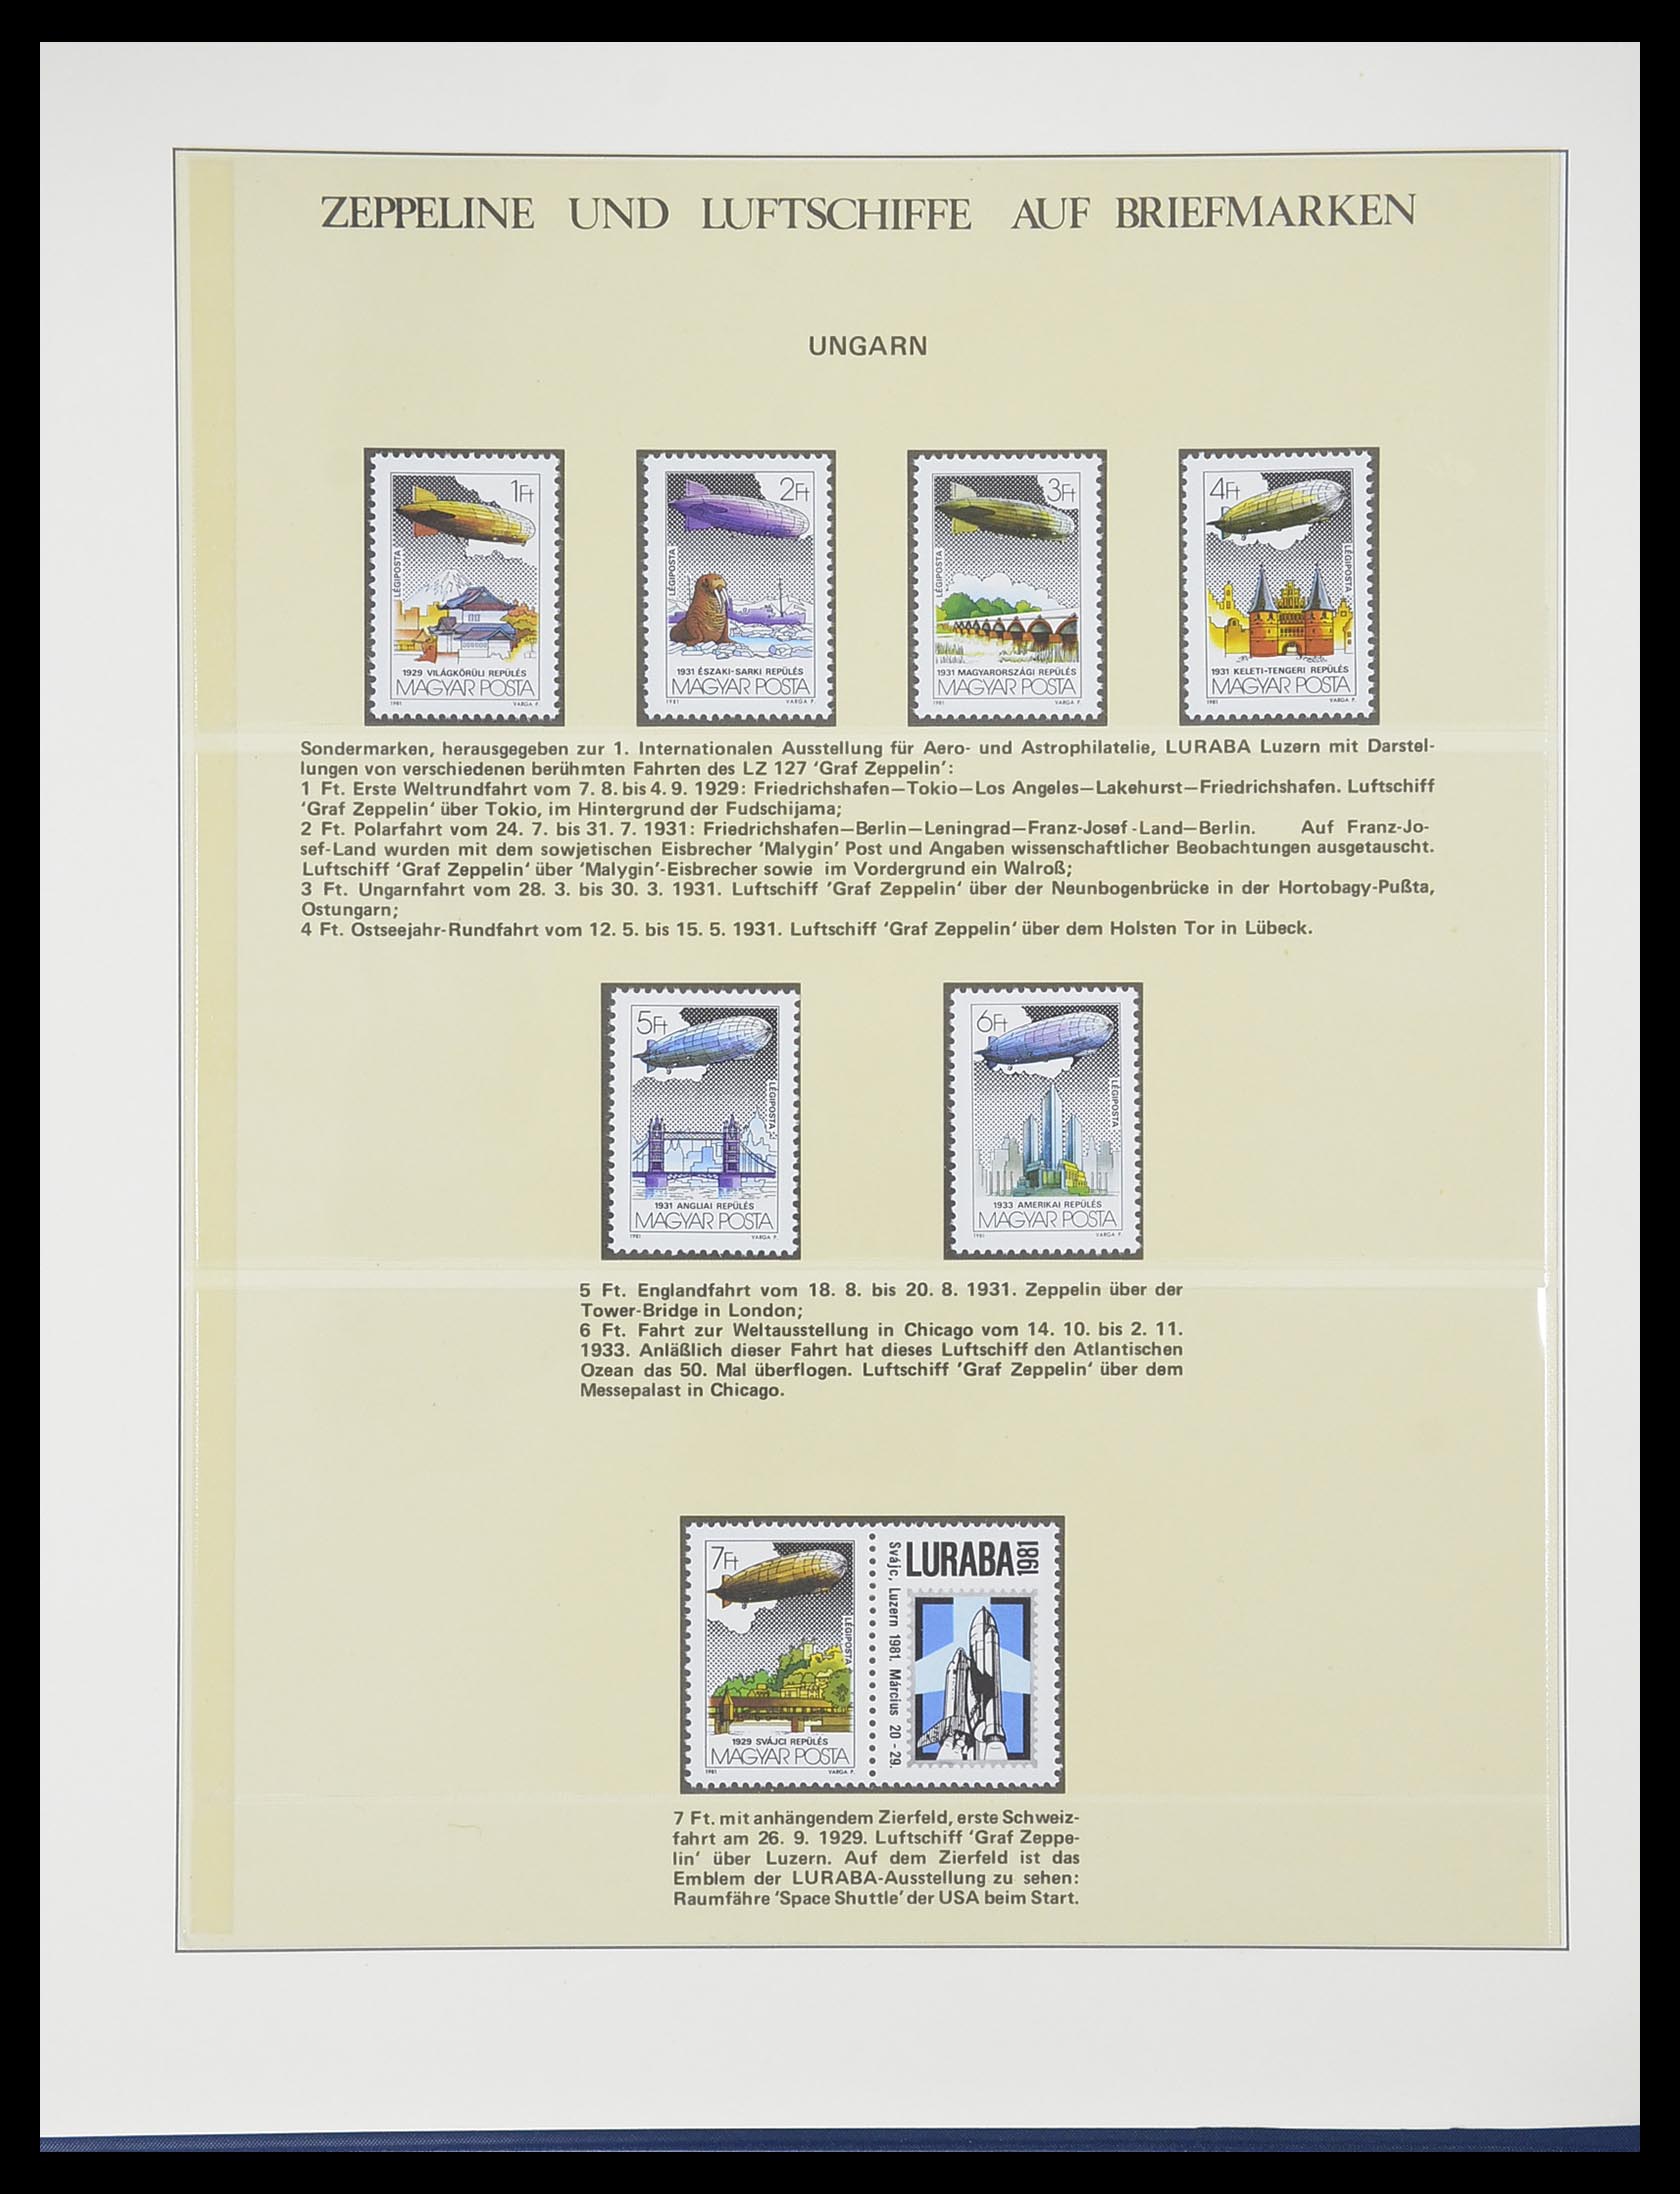 33307 029 - Stamp collection 33307 Thematic Zeppelin 1952-2010!